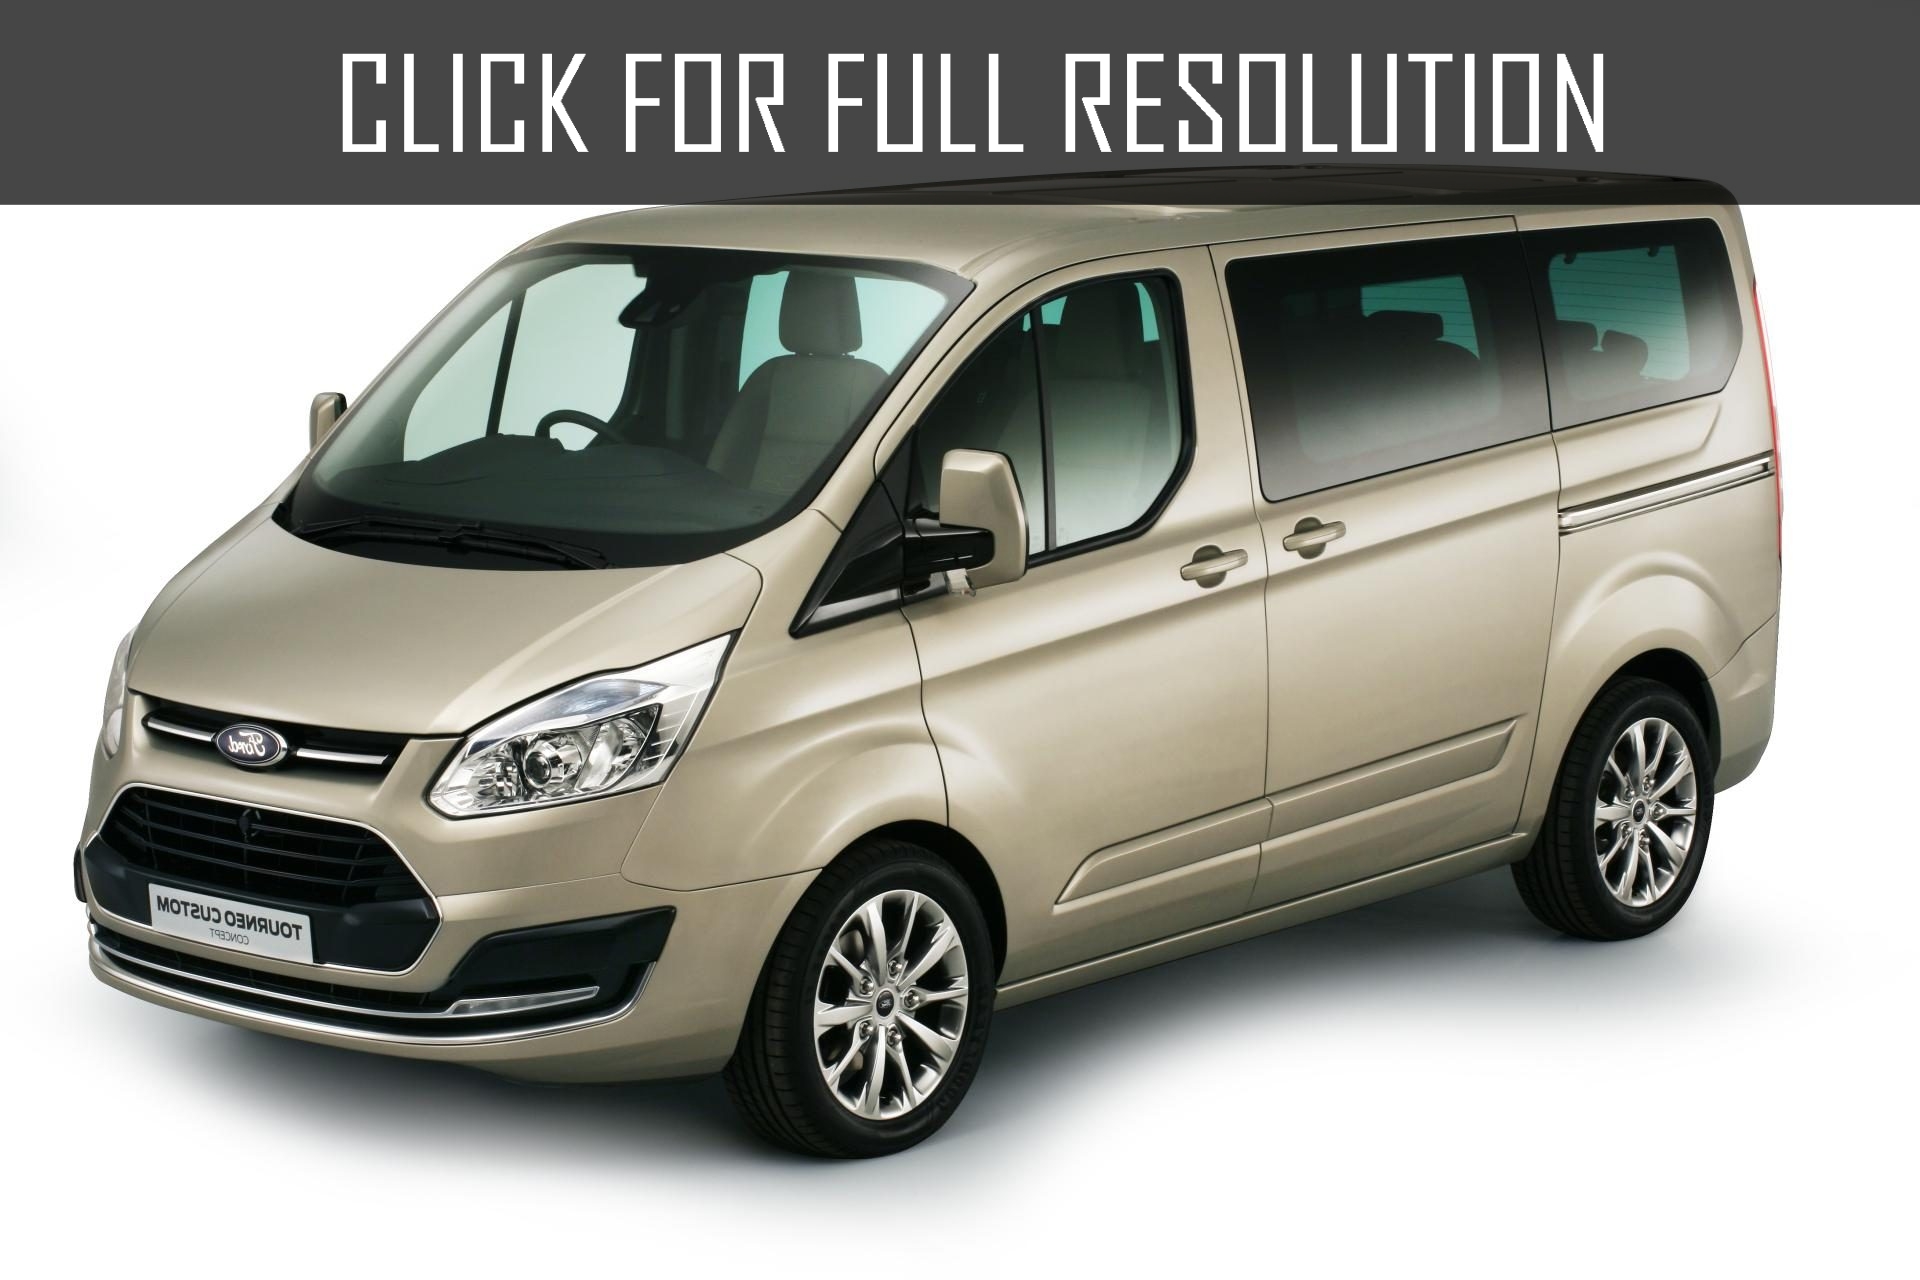 Ford Tourneo 9 Seater amazing photo gallery, some information and